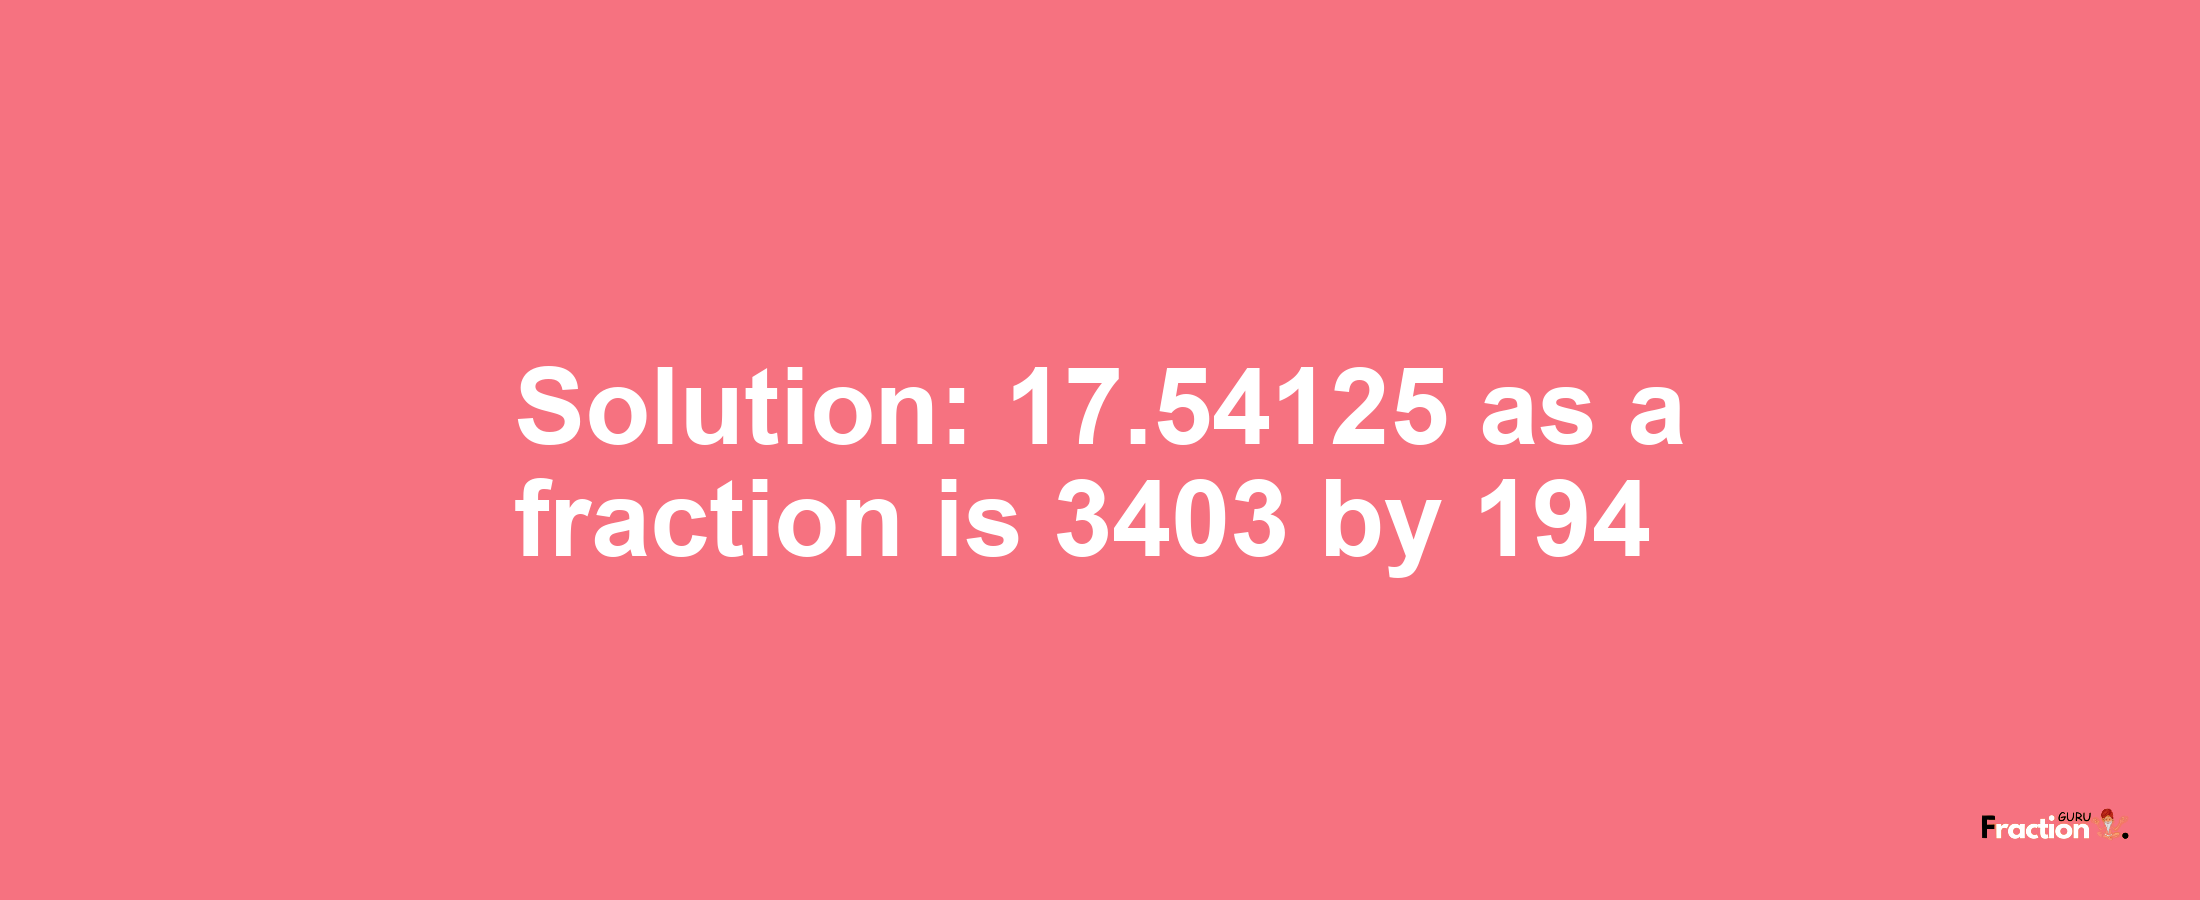 Solution:17.54125 as a fraction is 3403/194